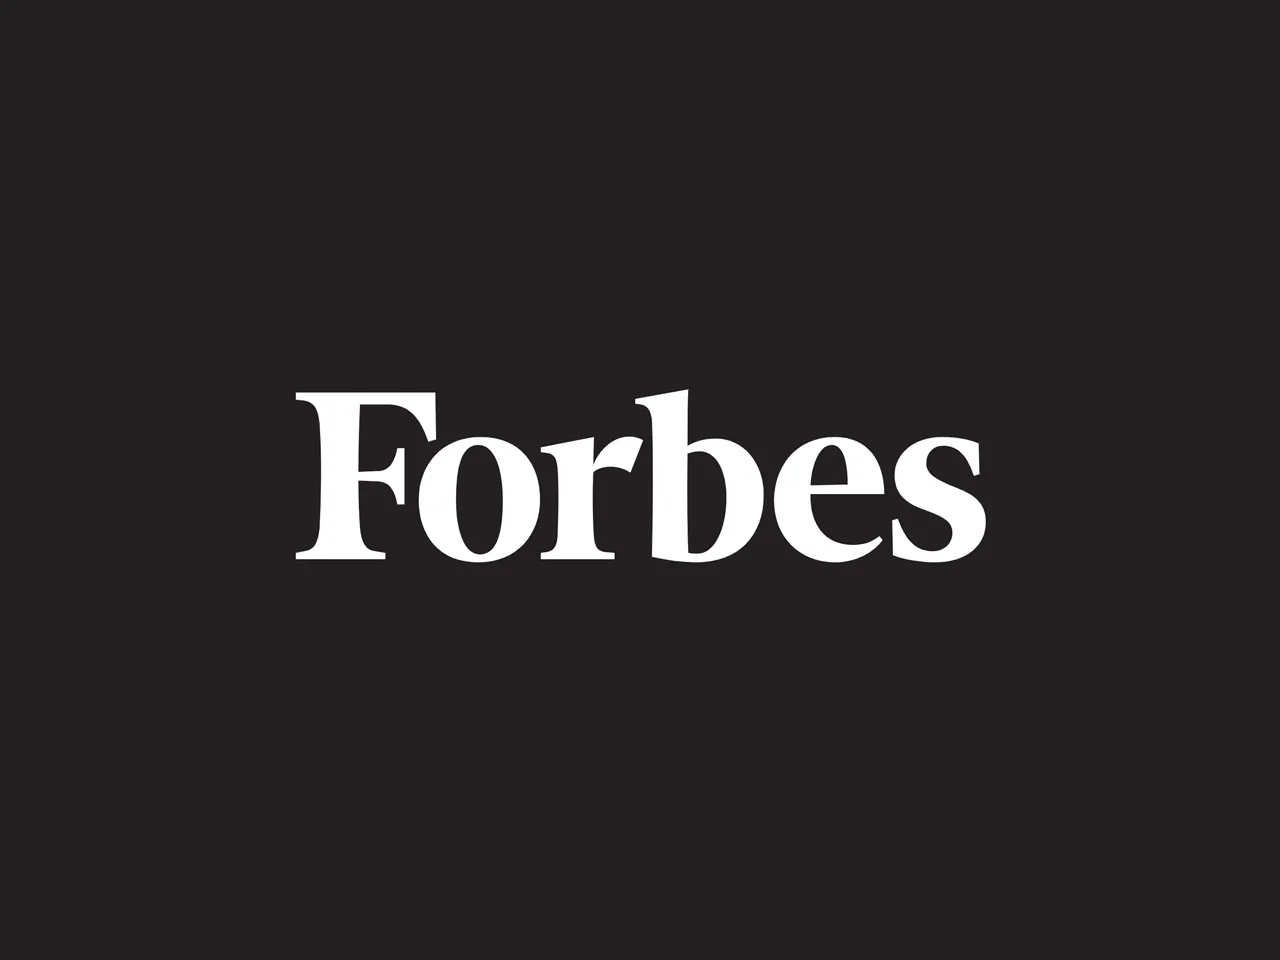 Forbes misleading ads